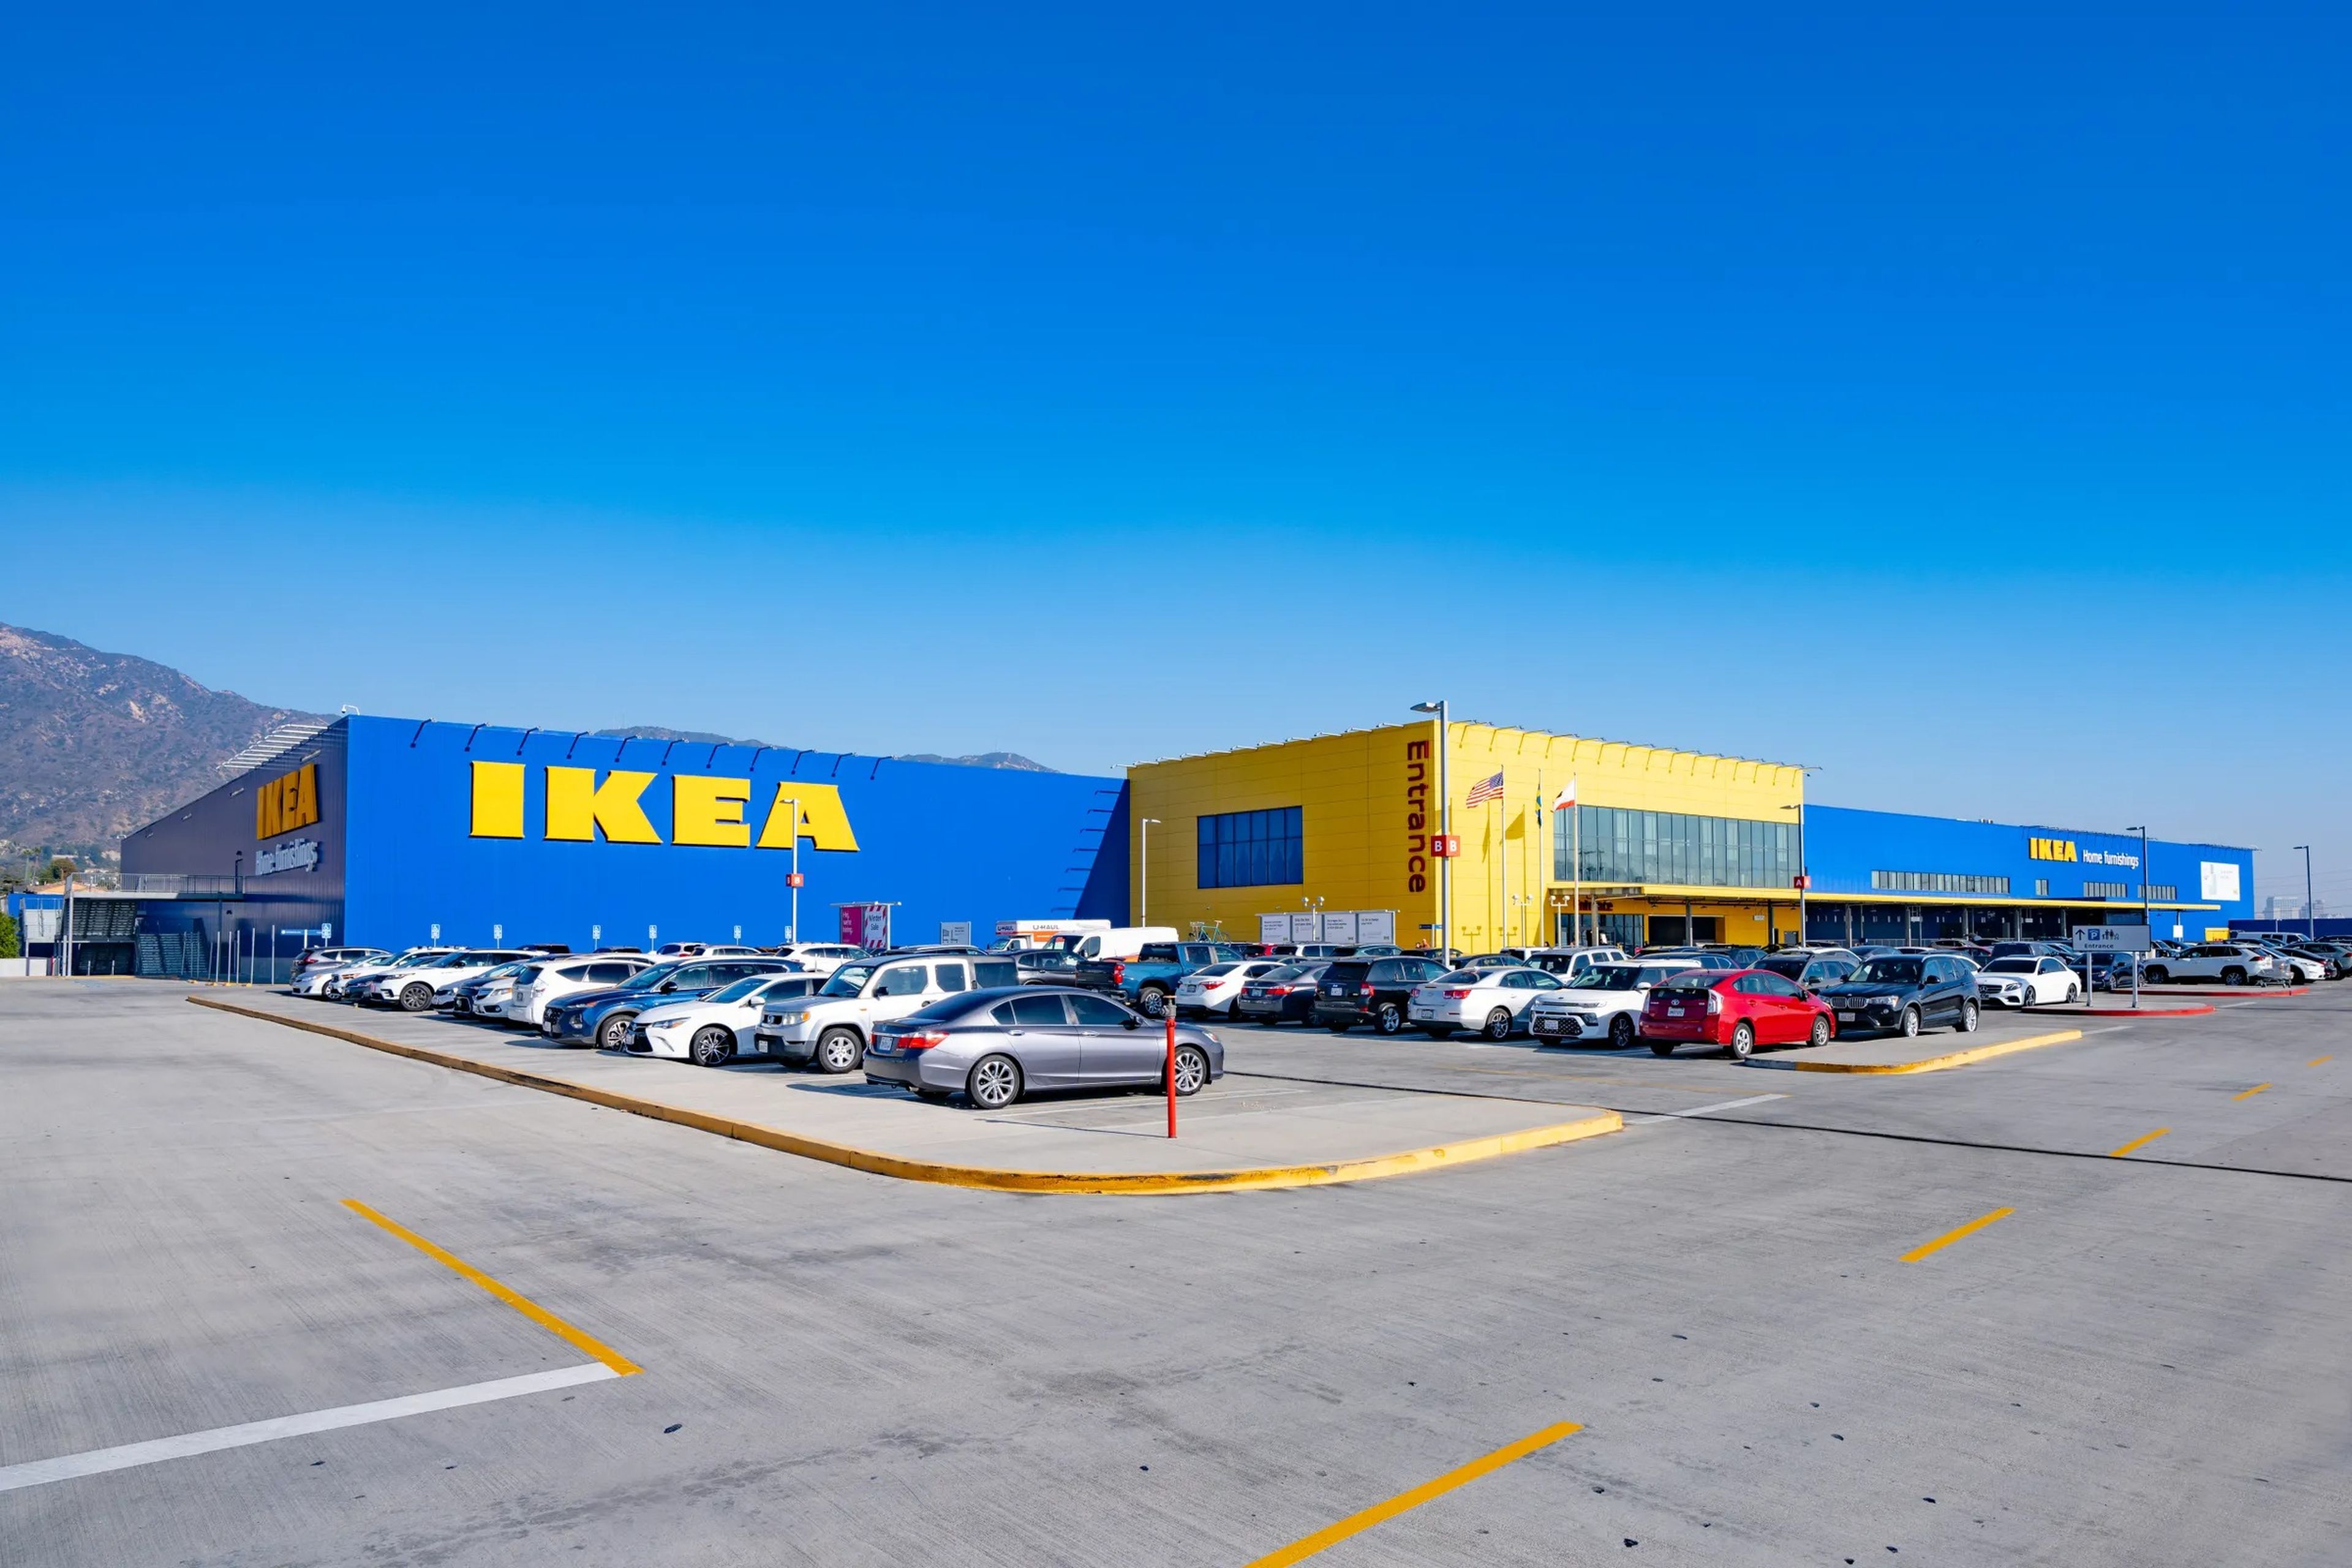 Cars sit parked outside of an Ikea store in California. The store is painted in the retailer's blue and yellow colors, and a sign that says "Entrance" is visible near the center of the building.